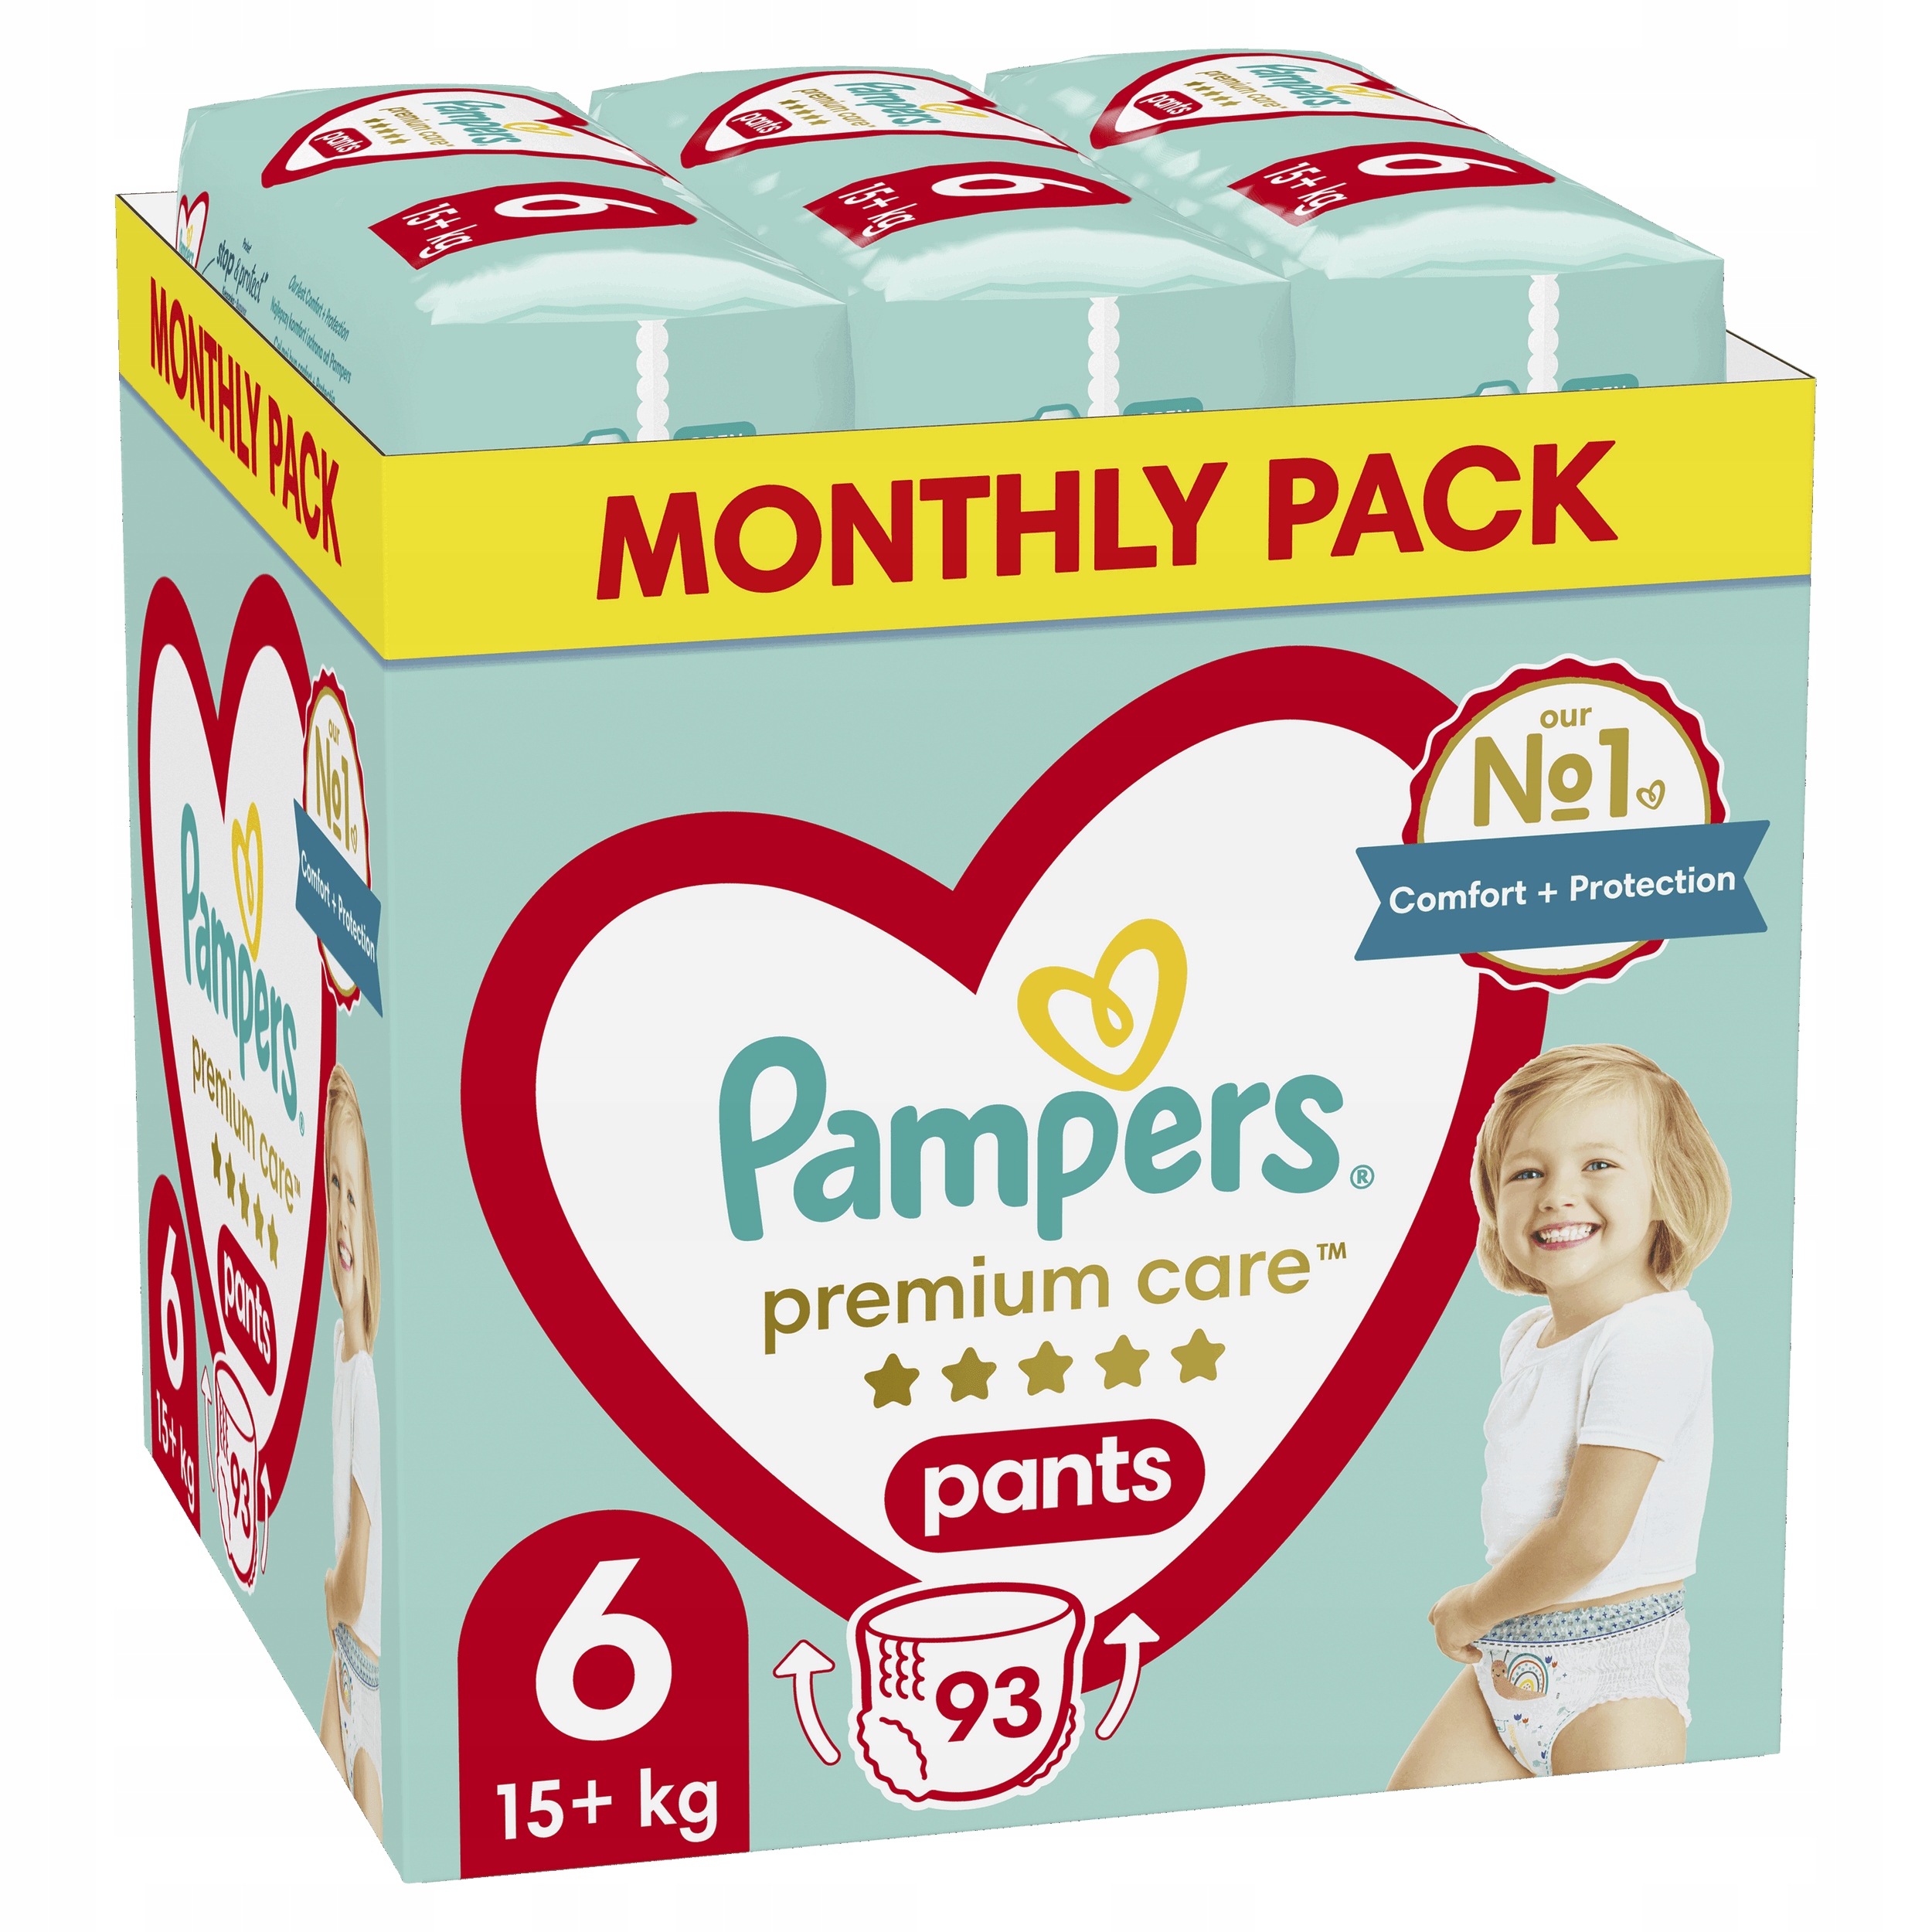 pampers history